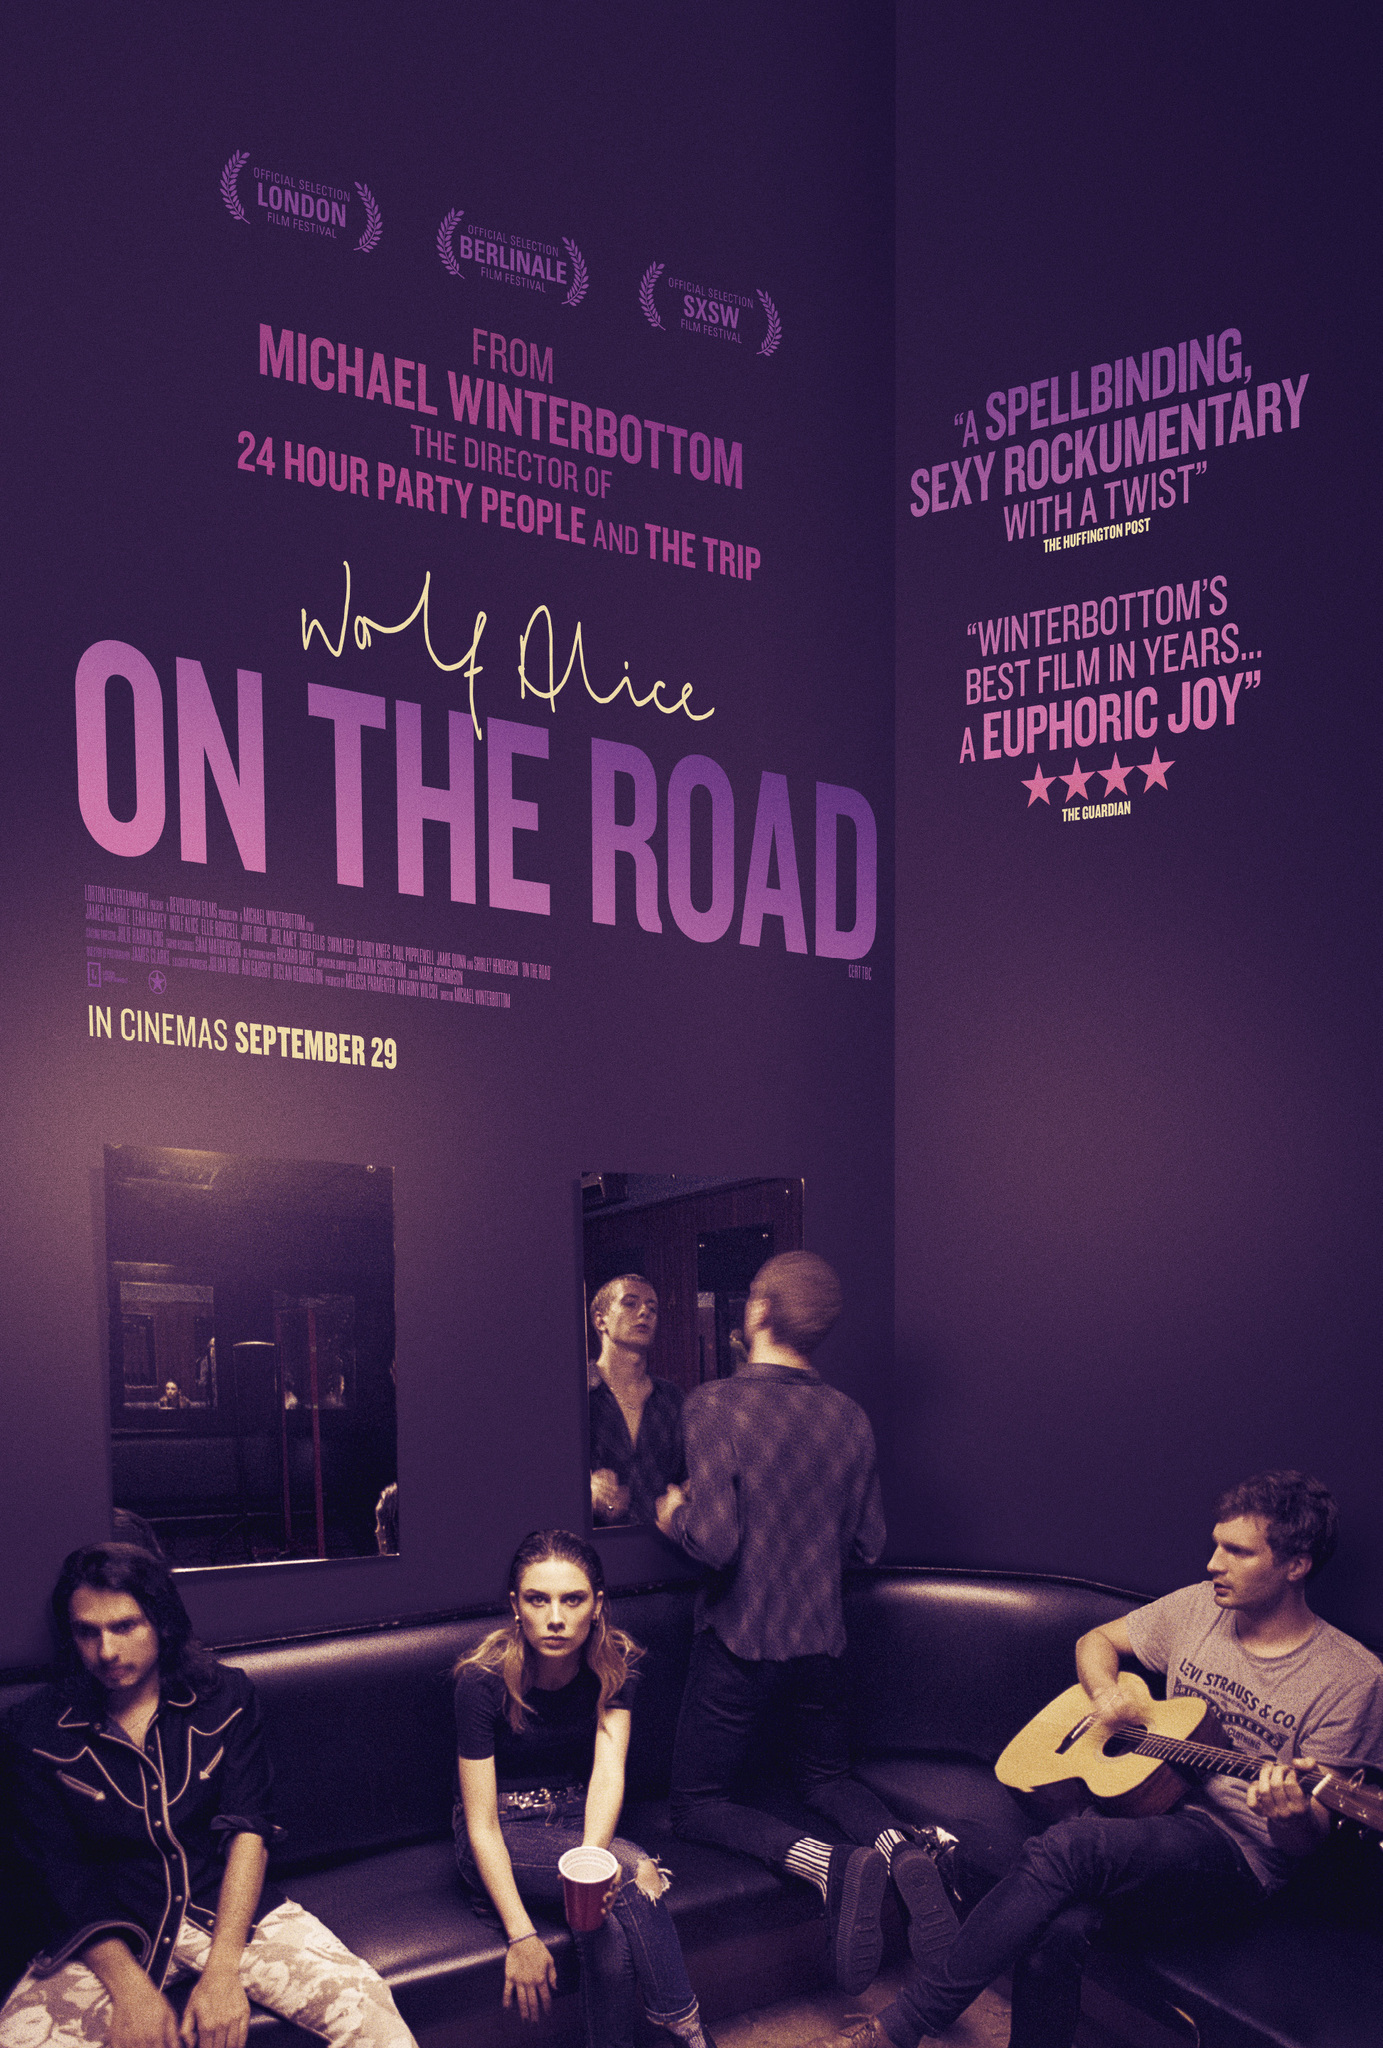 On the Road (2016) starring Shirley Henderson on DVD on DVD